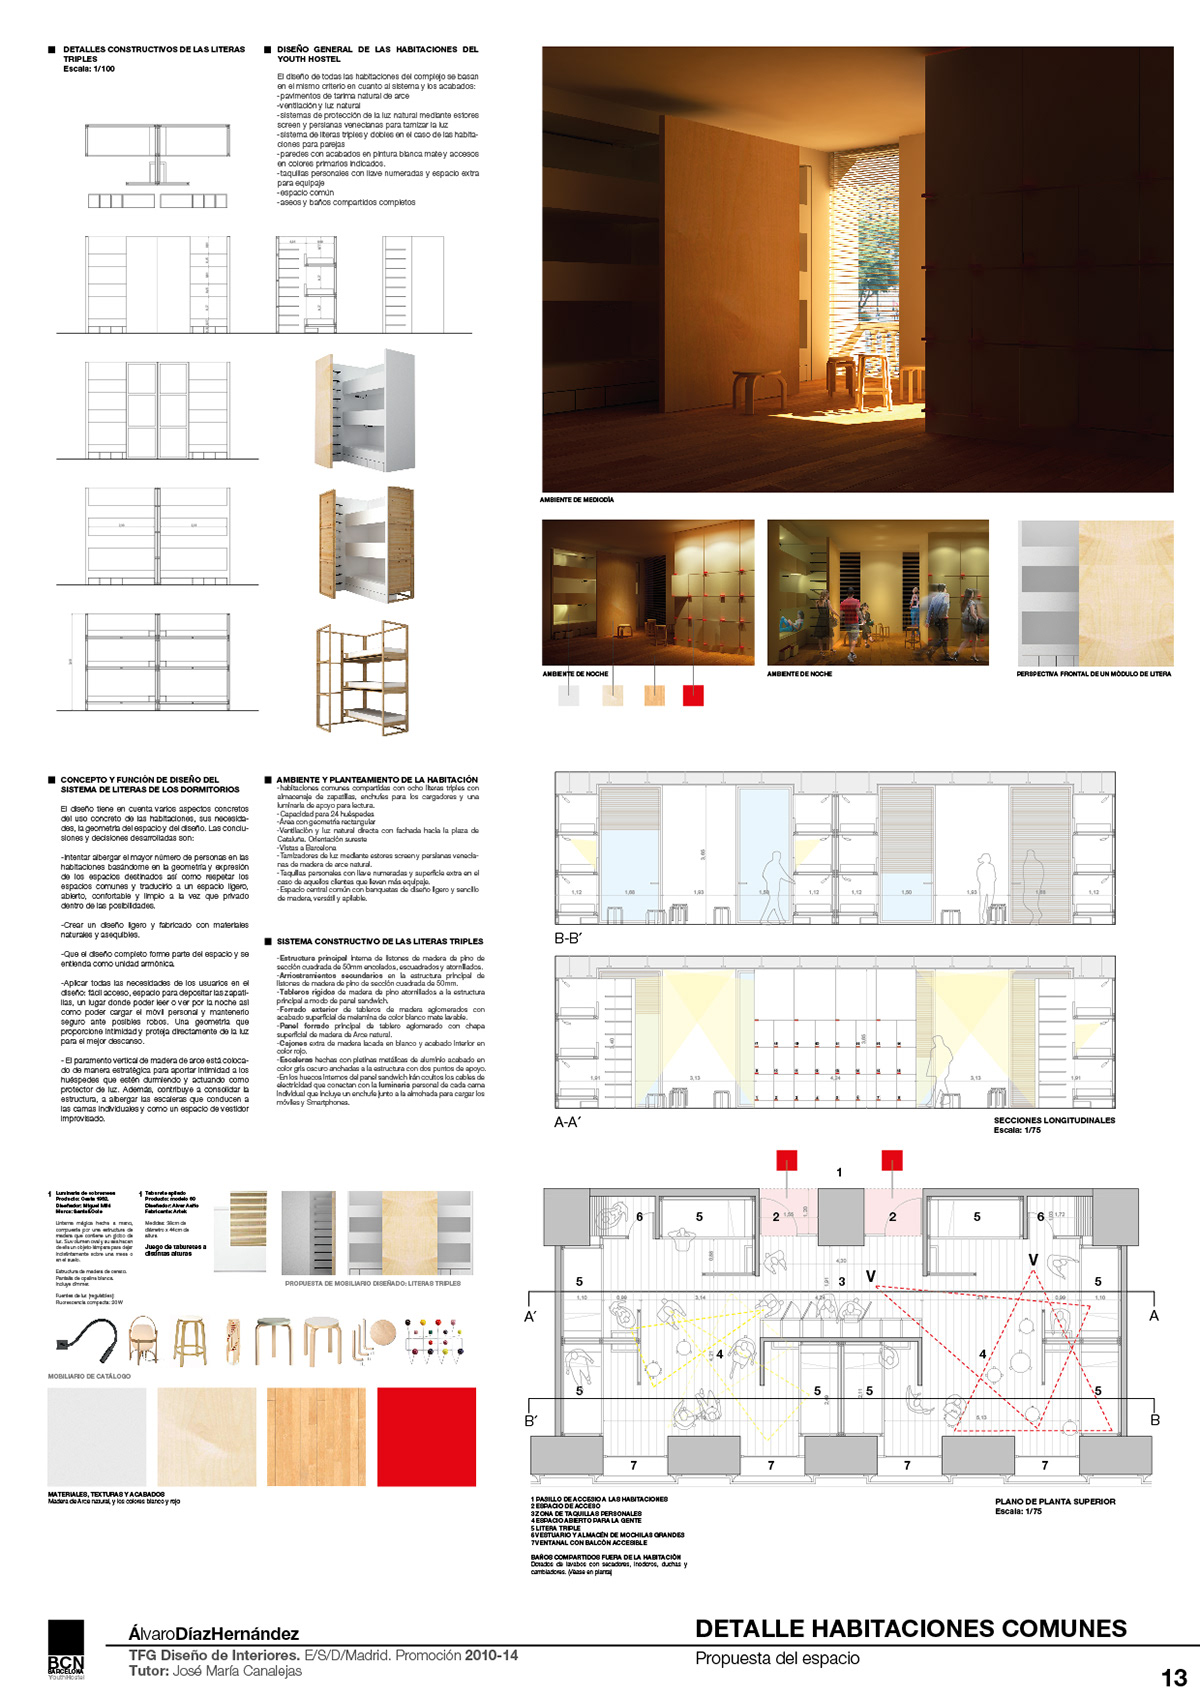 interiors design editorial Layout minimalist colors colorful wood youth hostel barcelona spain Project city